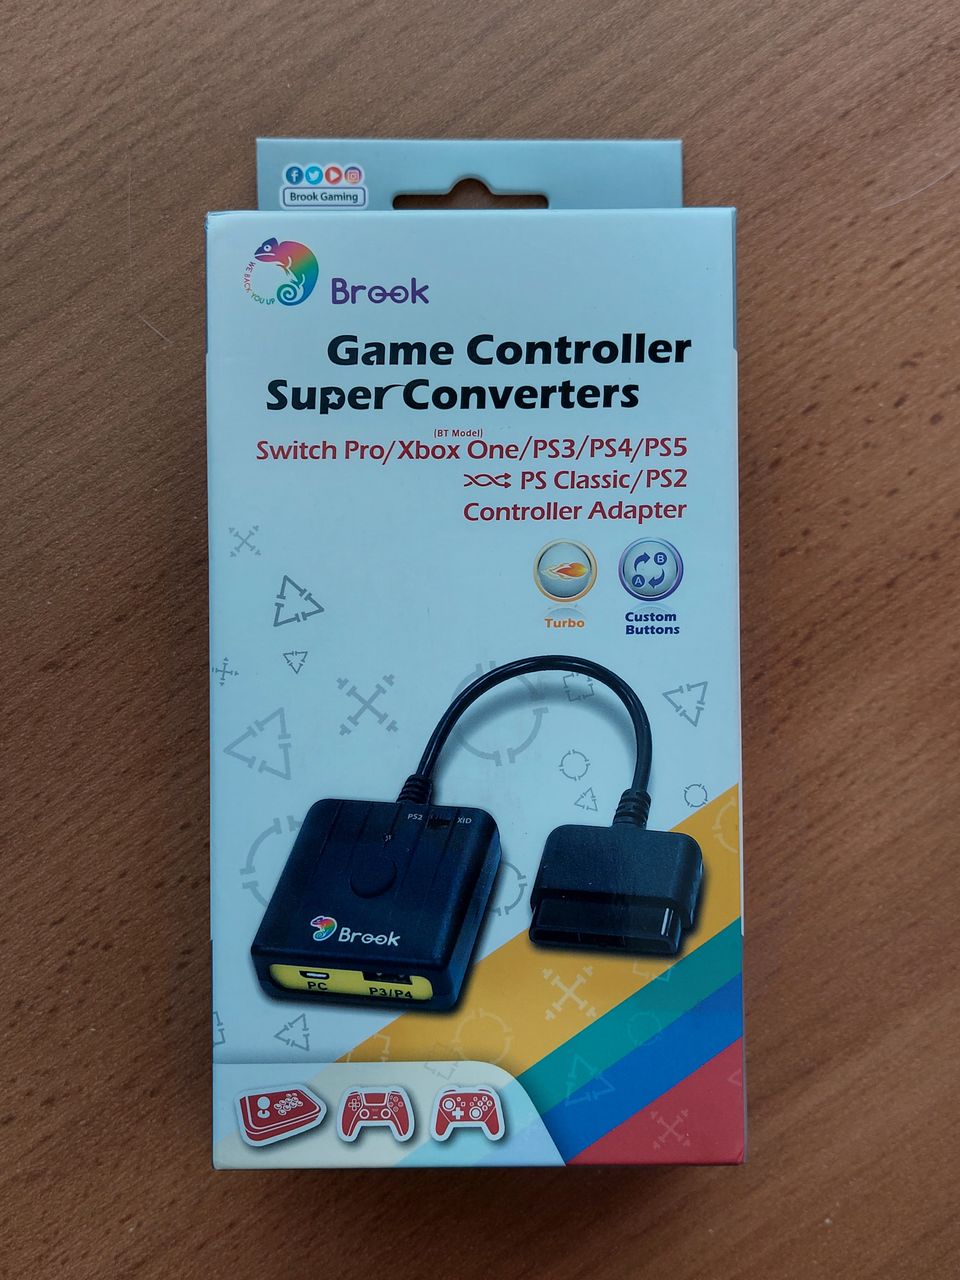 Game Controller Super Converters SwitchPro/Xbox One/PS3/PS4/PS5/PS Classic/PS2